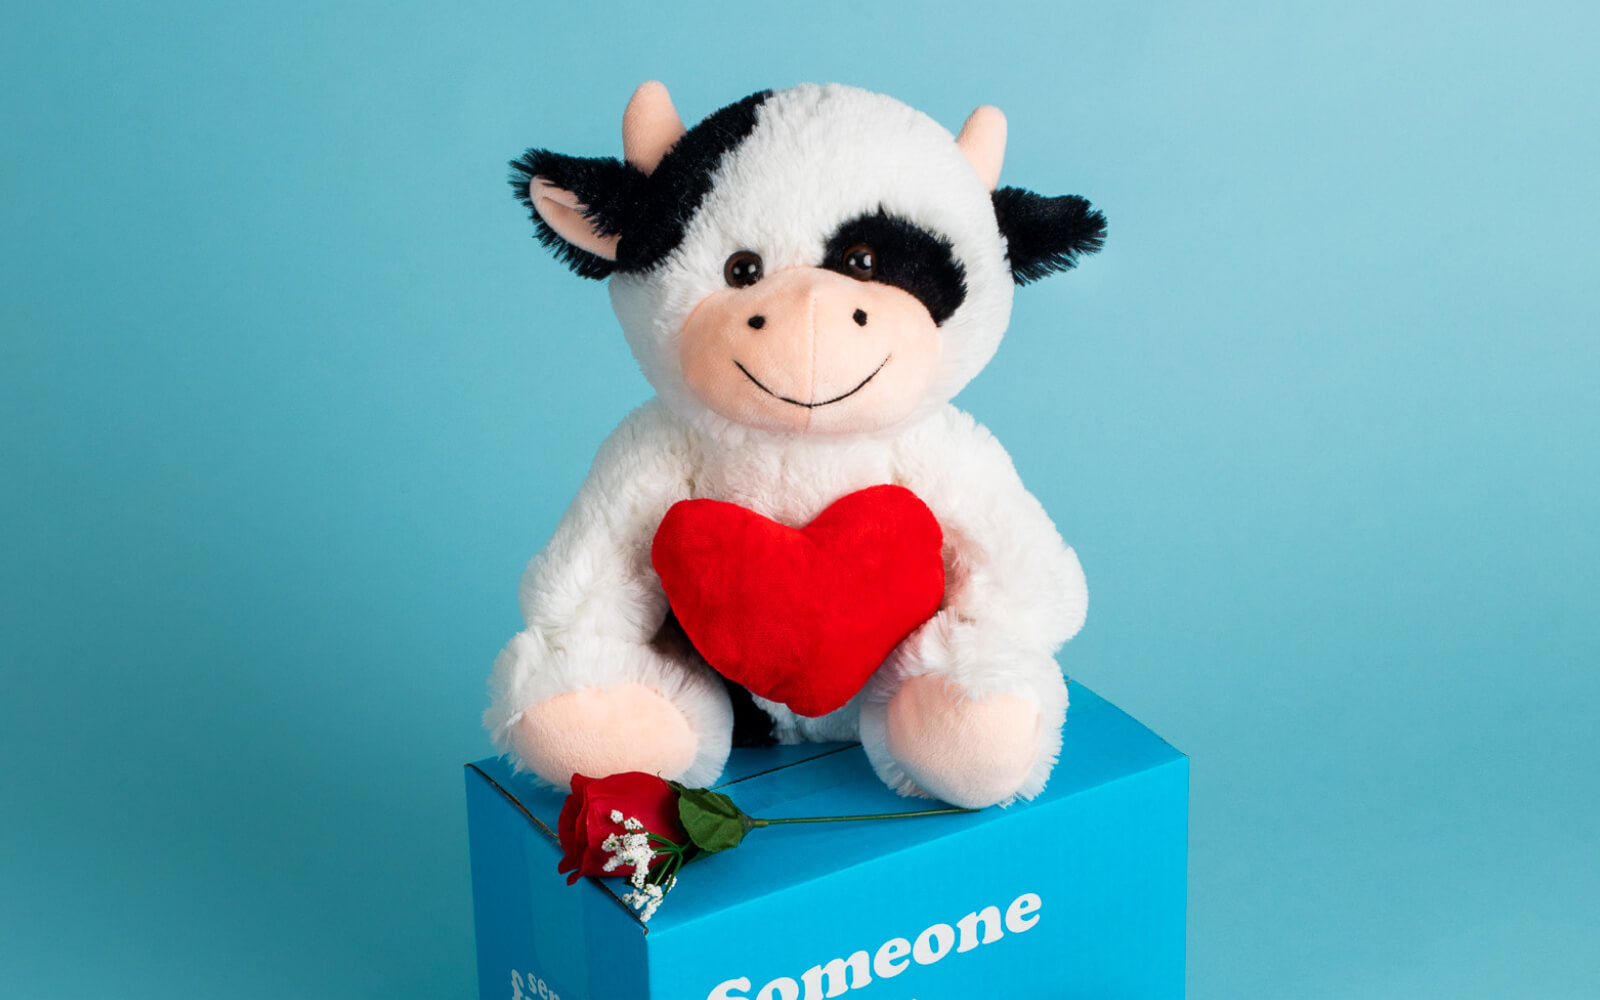 cow stuffed animal with heart pillow and rose